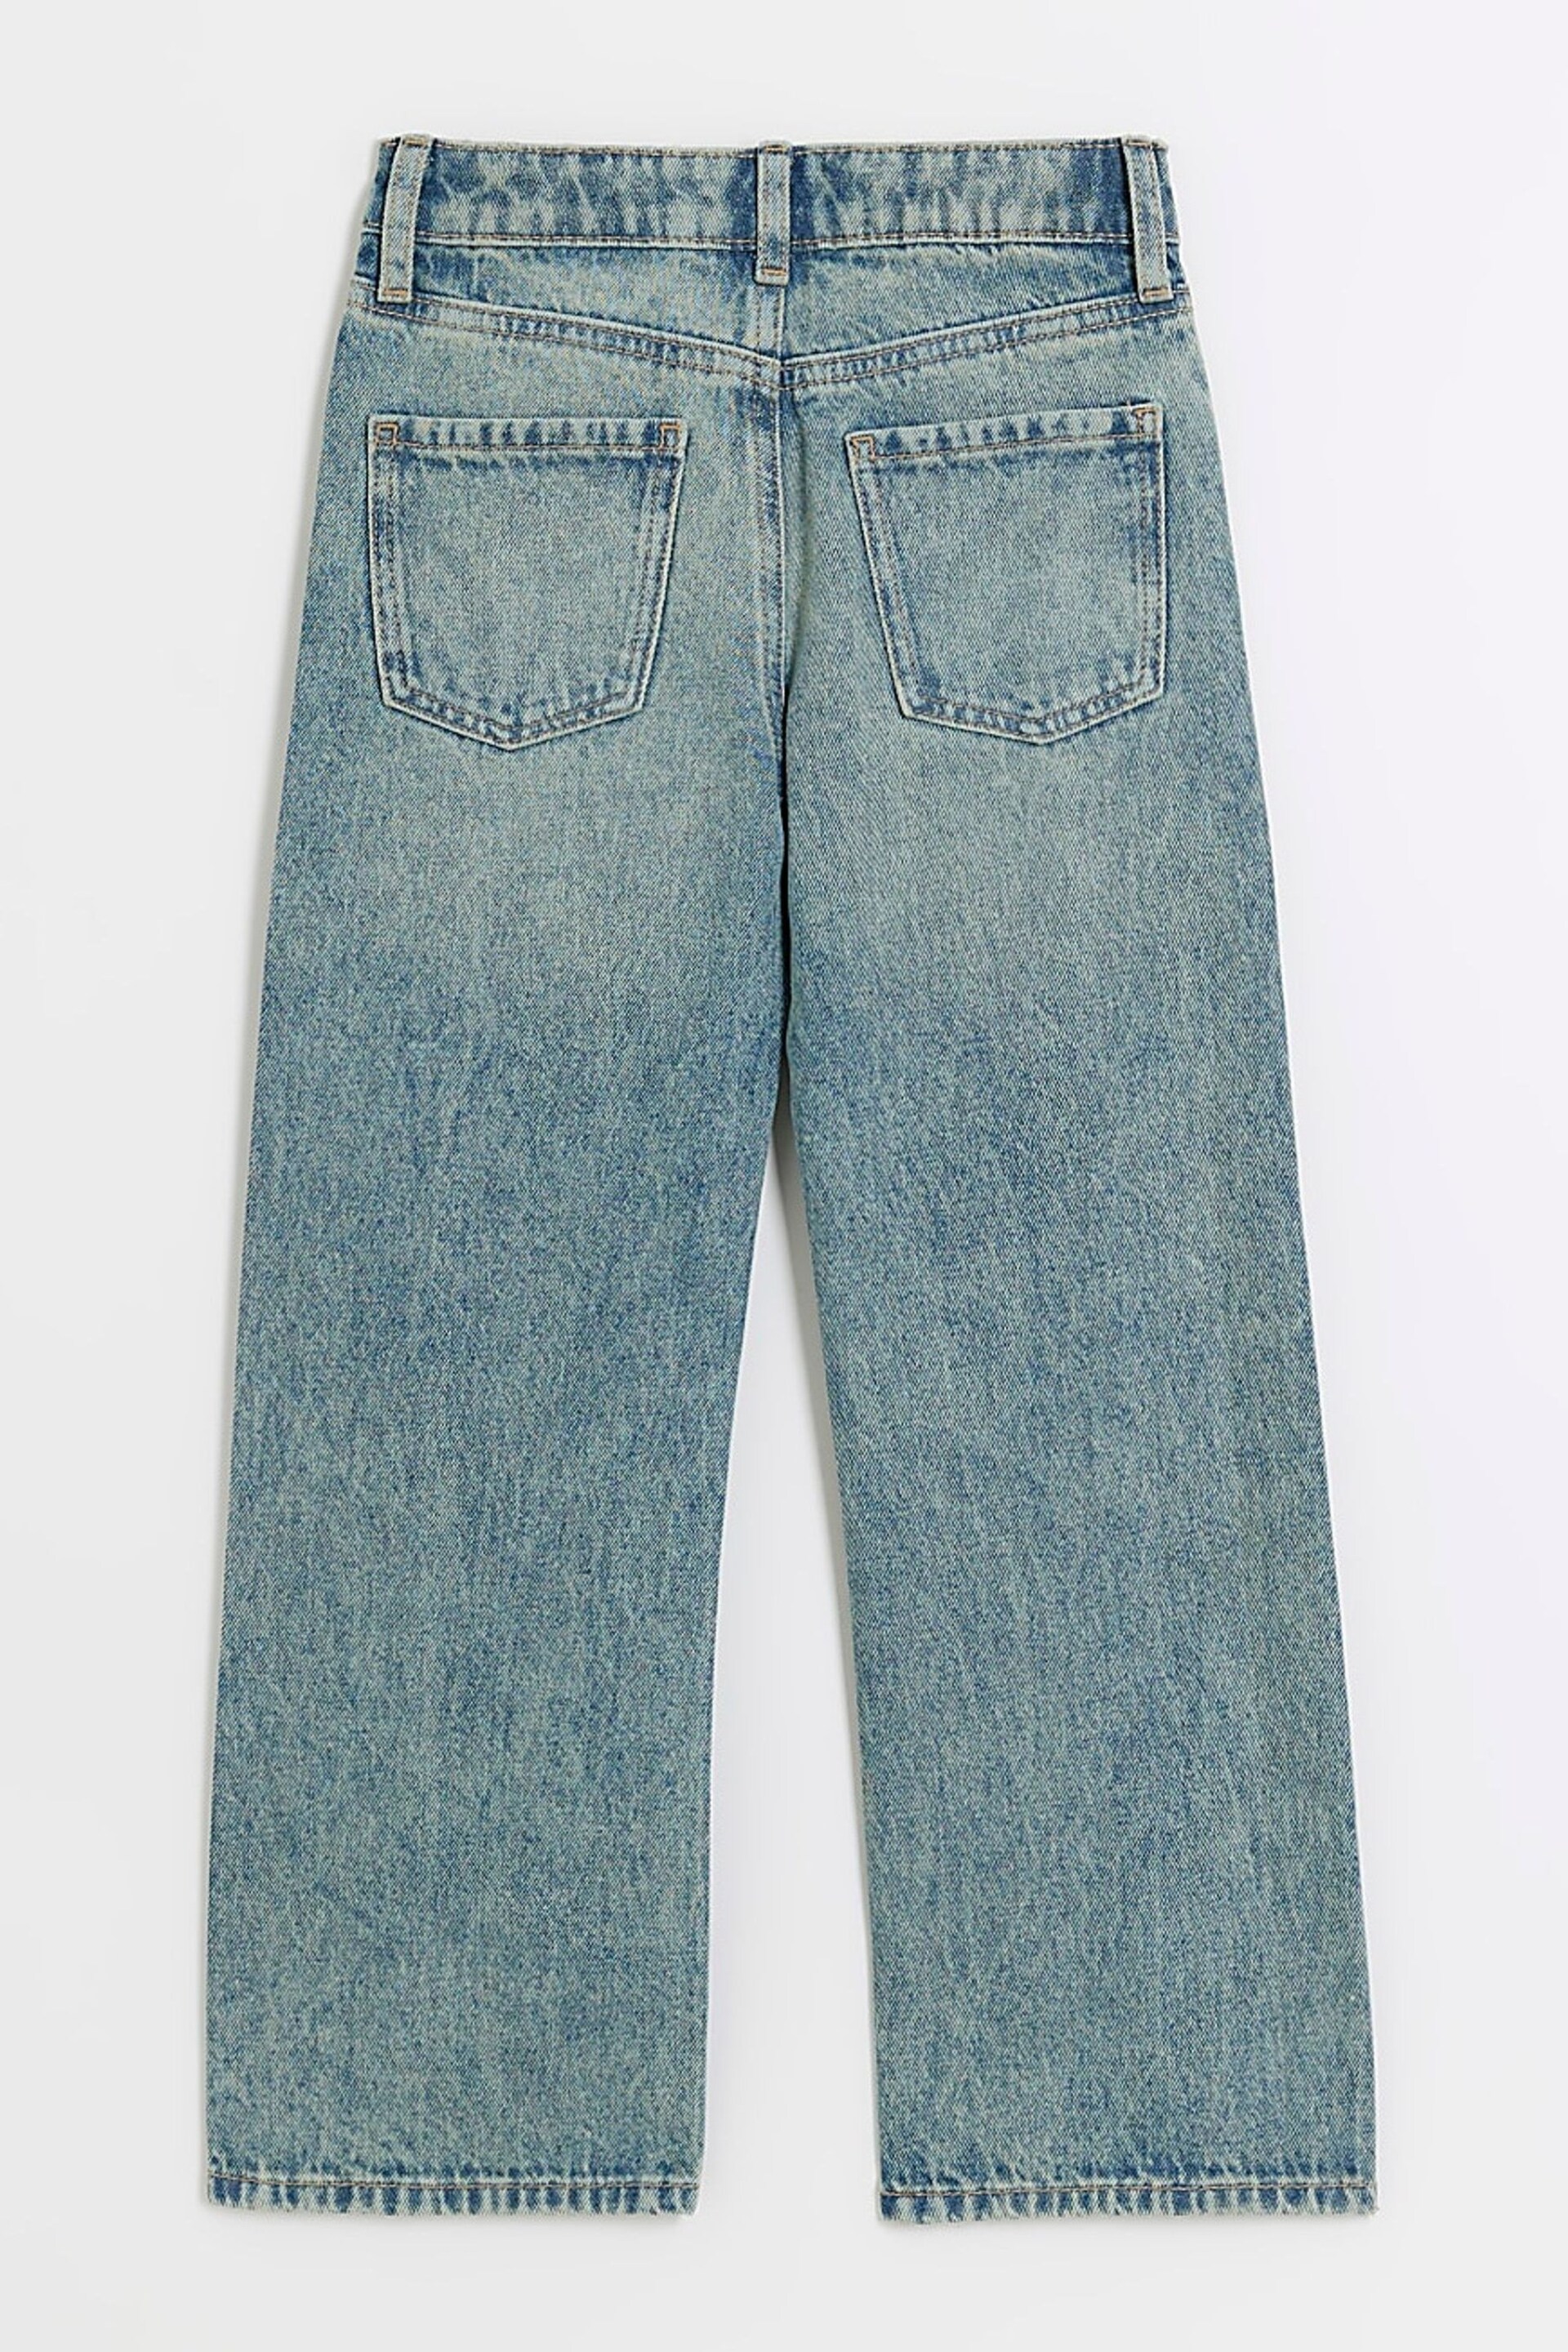 River Island Blue Girls Mid Studded Straight Fit Jeans - Image 2 of 4